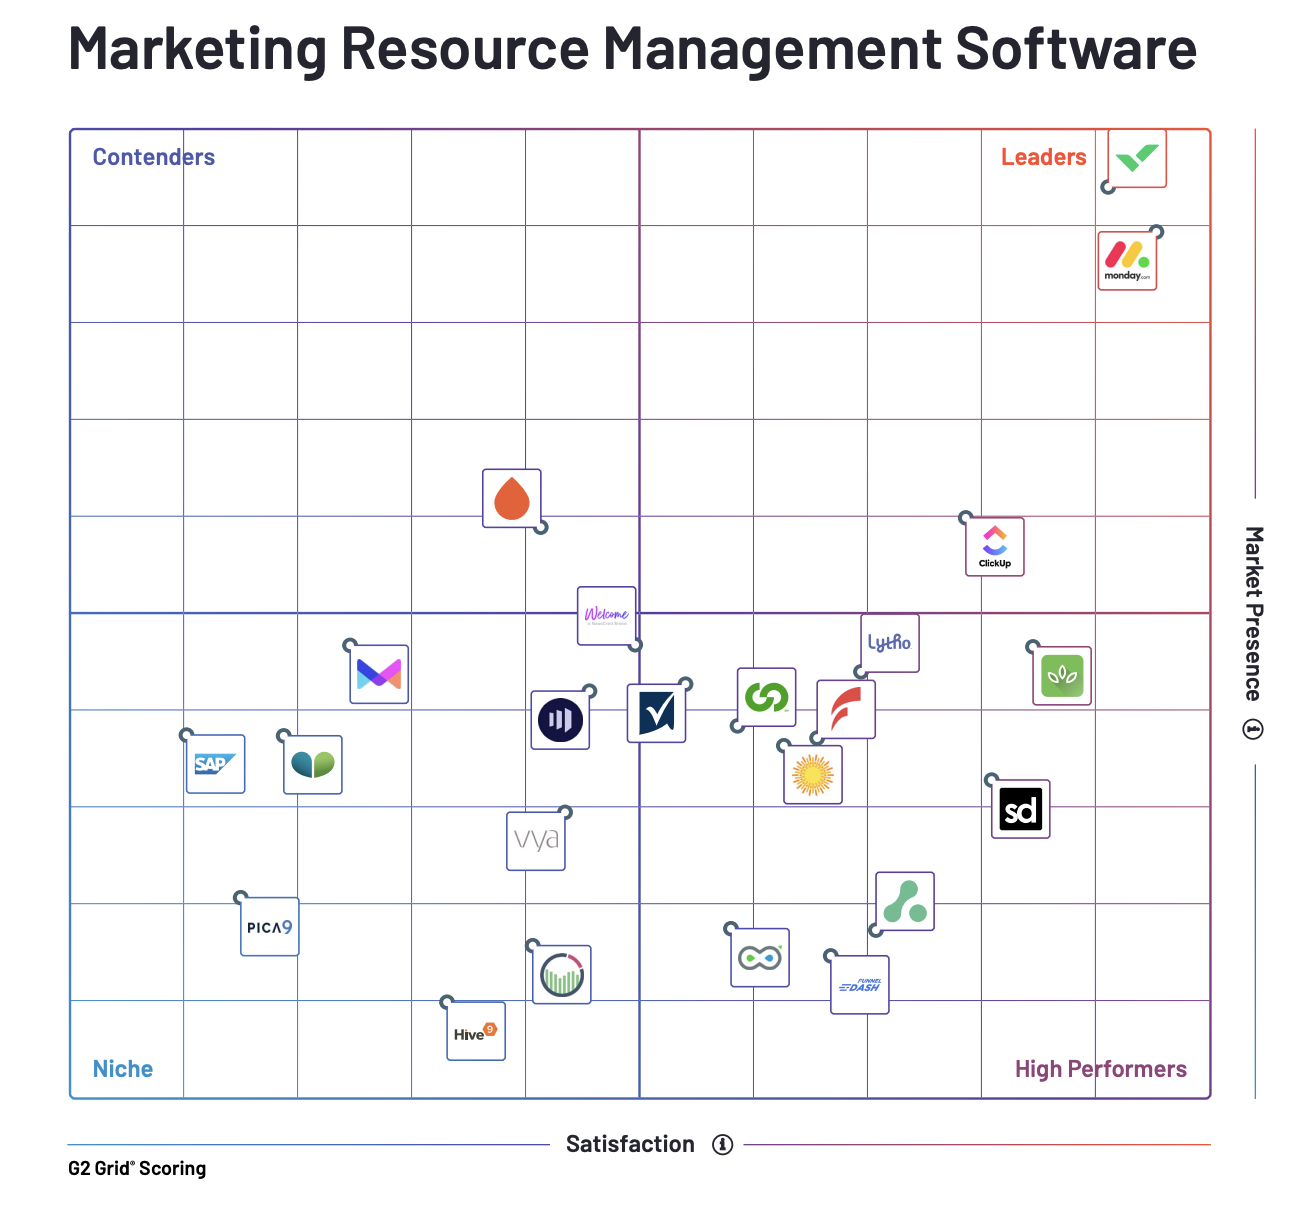 Wrike Named Leading Marketing Resource Management Solution by G2 2